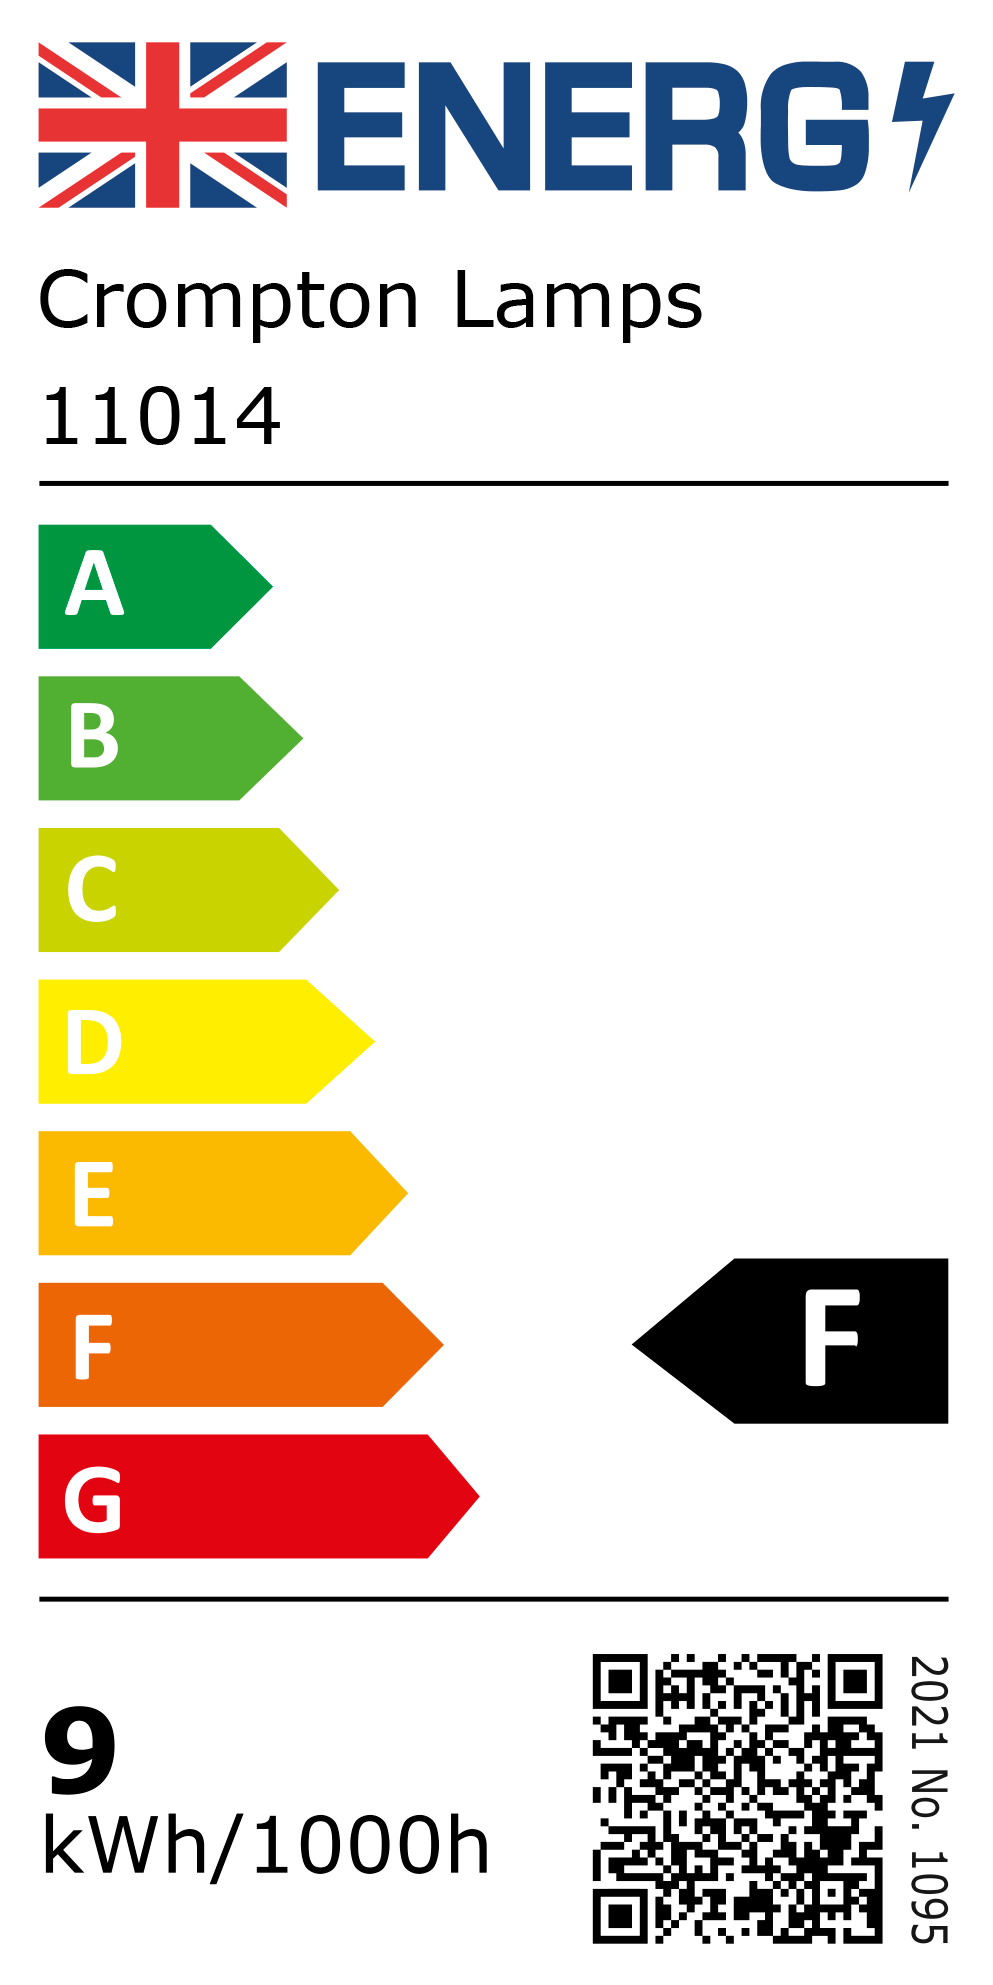 New 2021 Energy Rating Label: MPN 11014